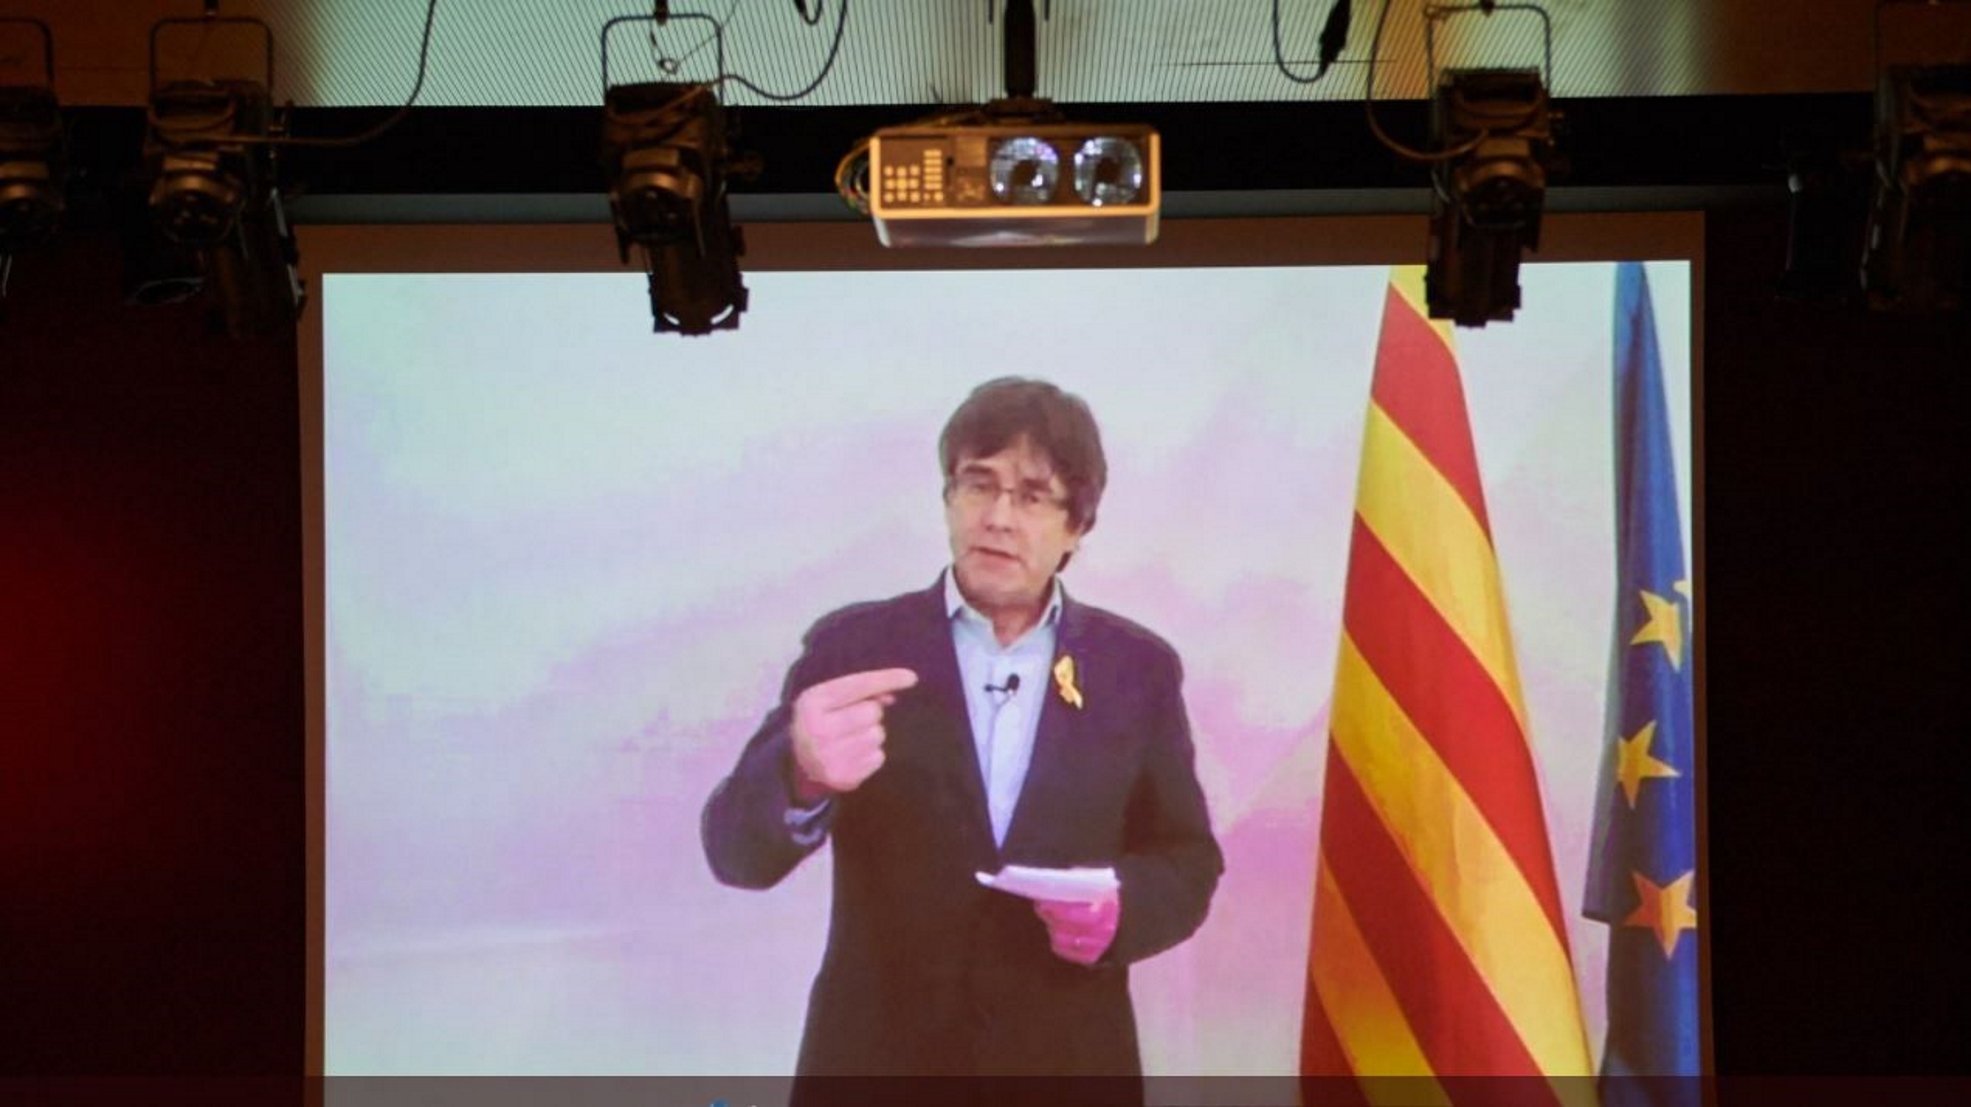 Puigdemont moves to consolidate the JxCat group into a new political party